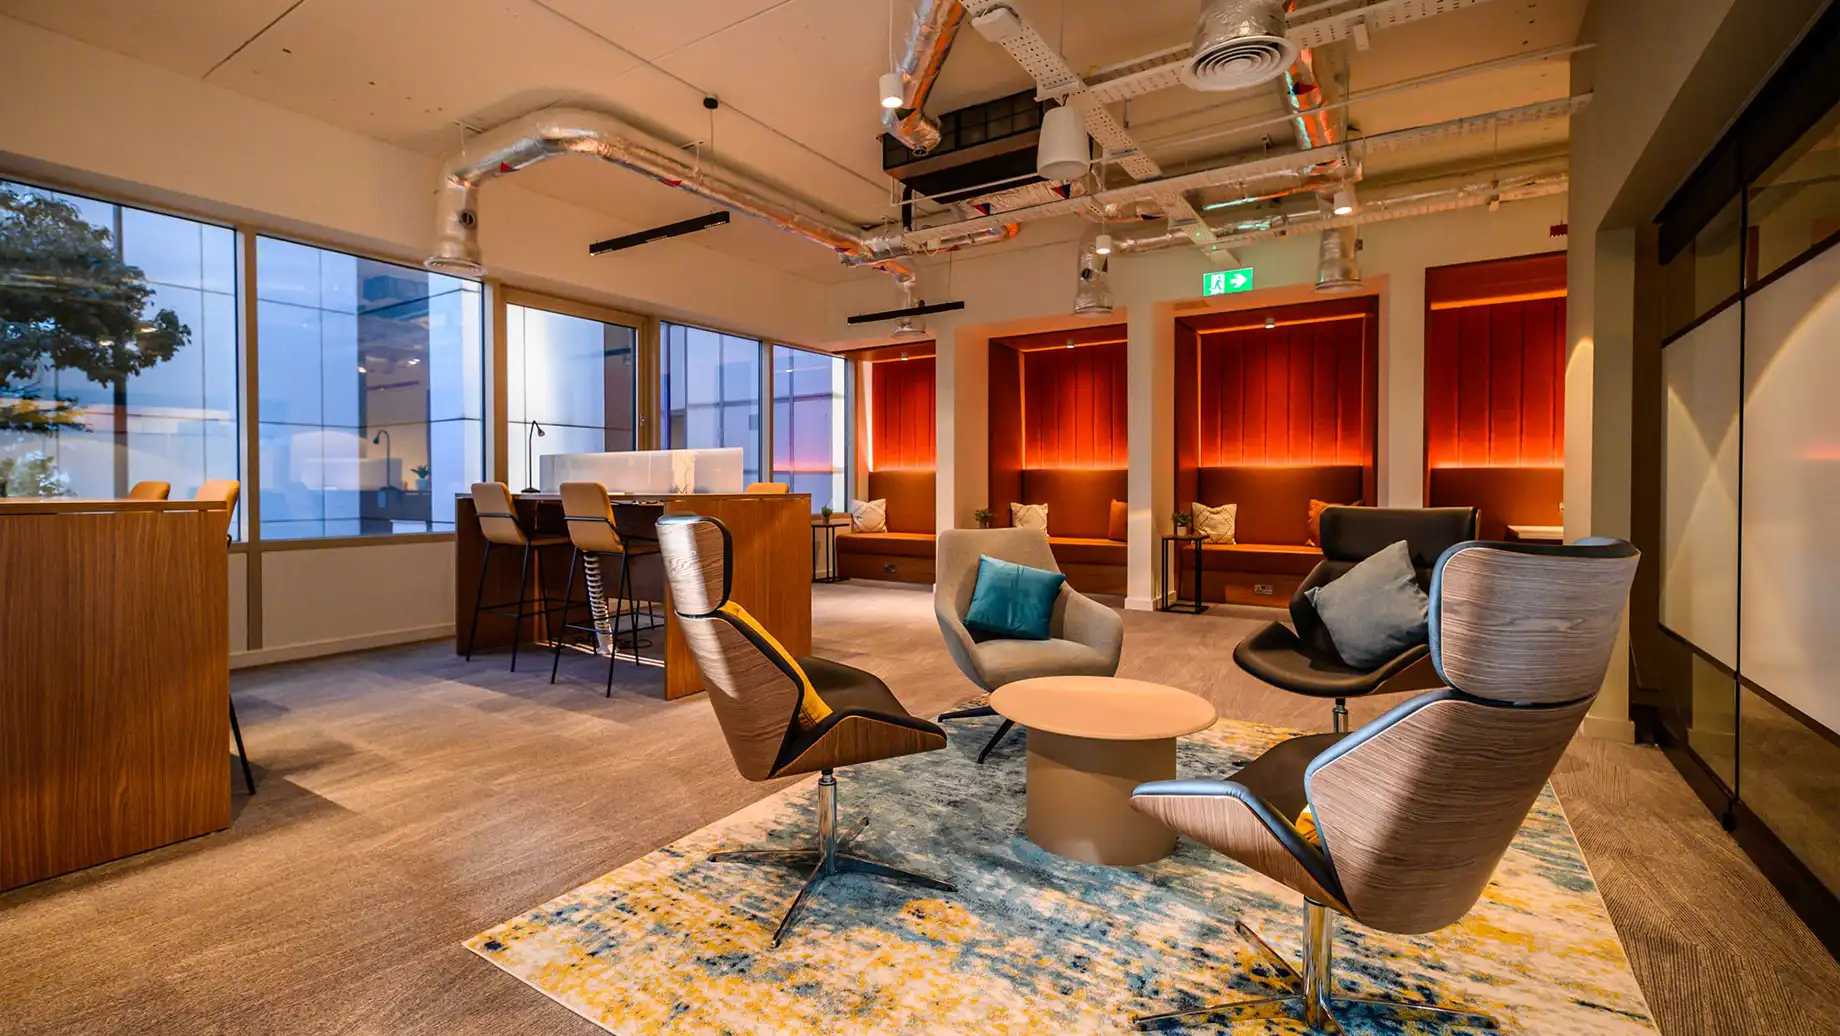 Manchester - Salford Quays Serviced Office & Coworking Space